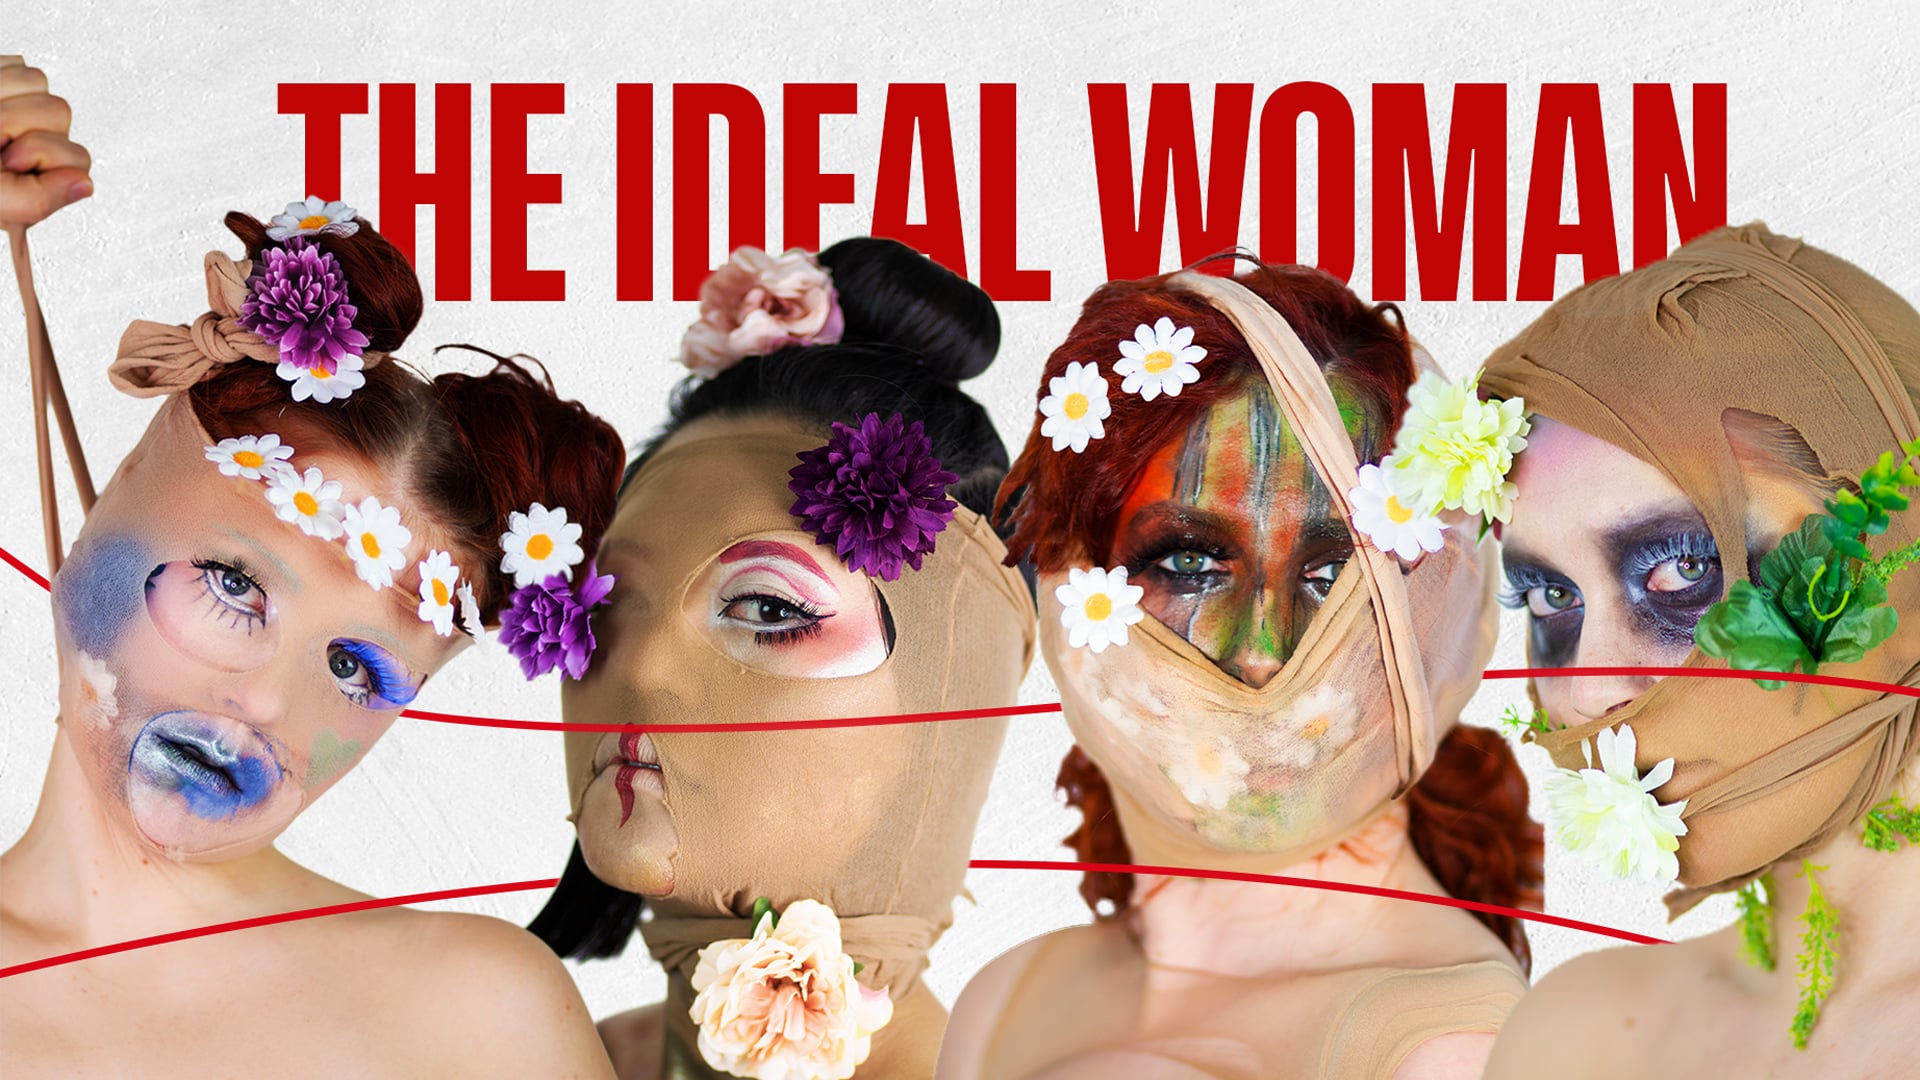 The Ideal Woman 2019 Crowdfunding Promo Video